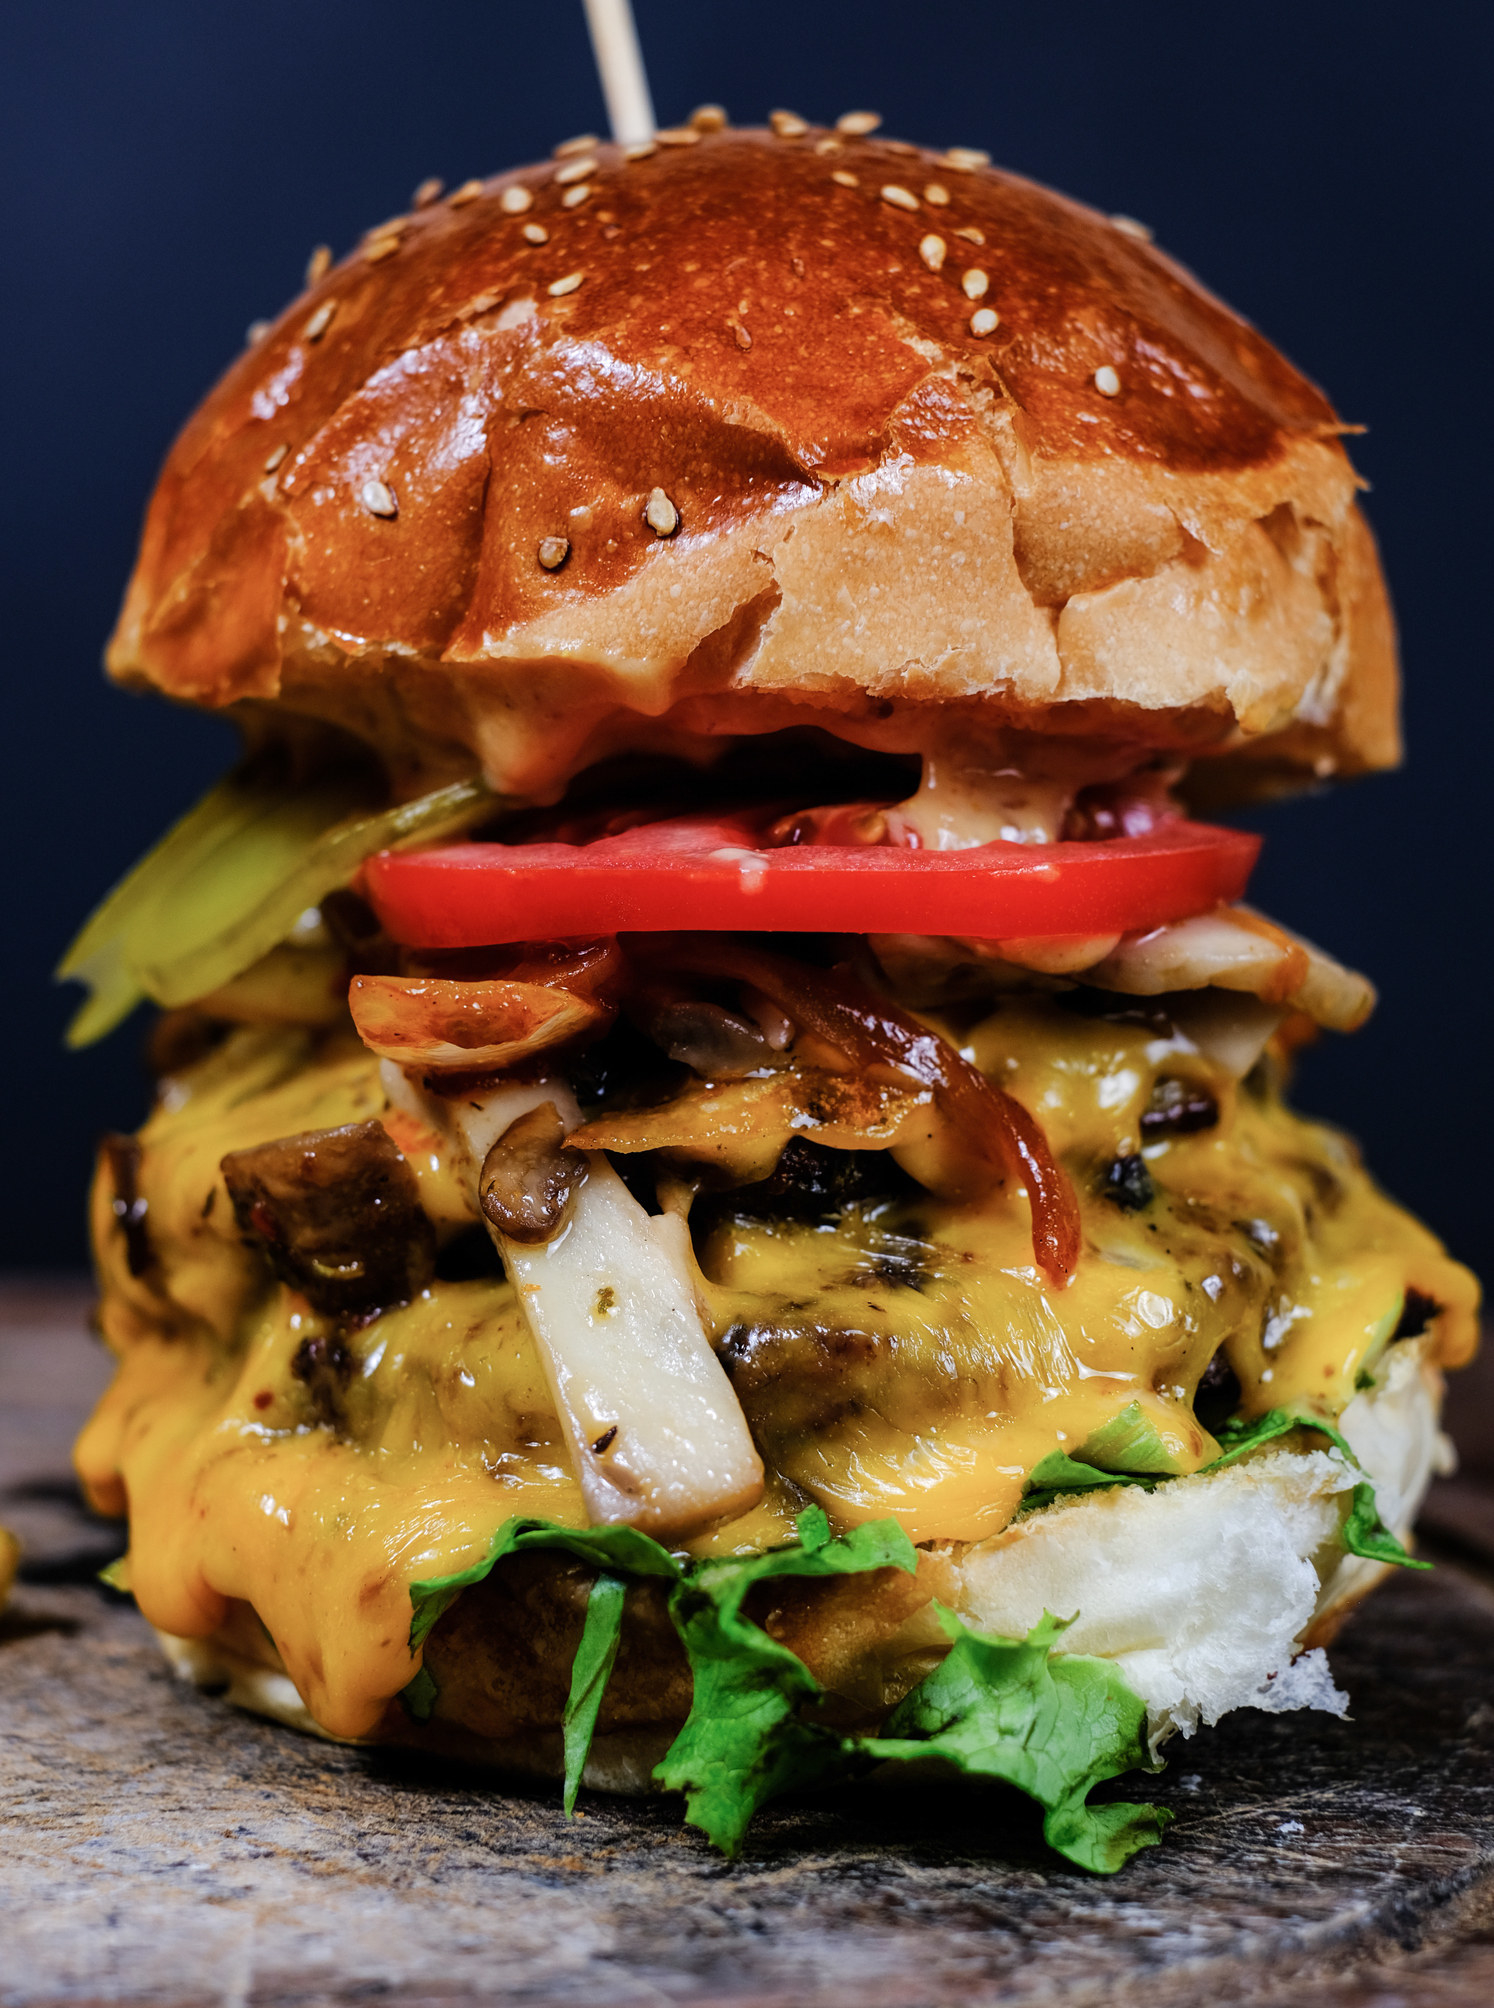 A big cheeseburger with lots of toppings.